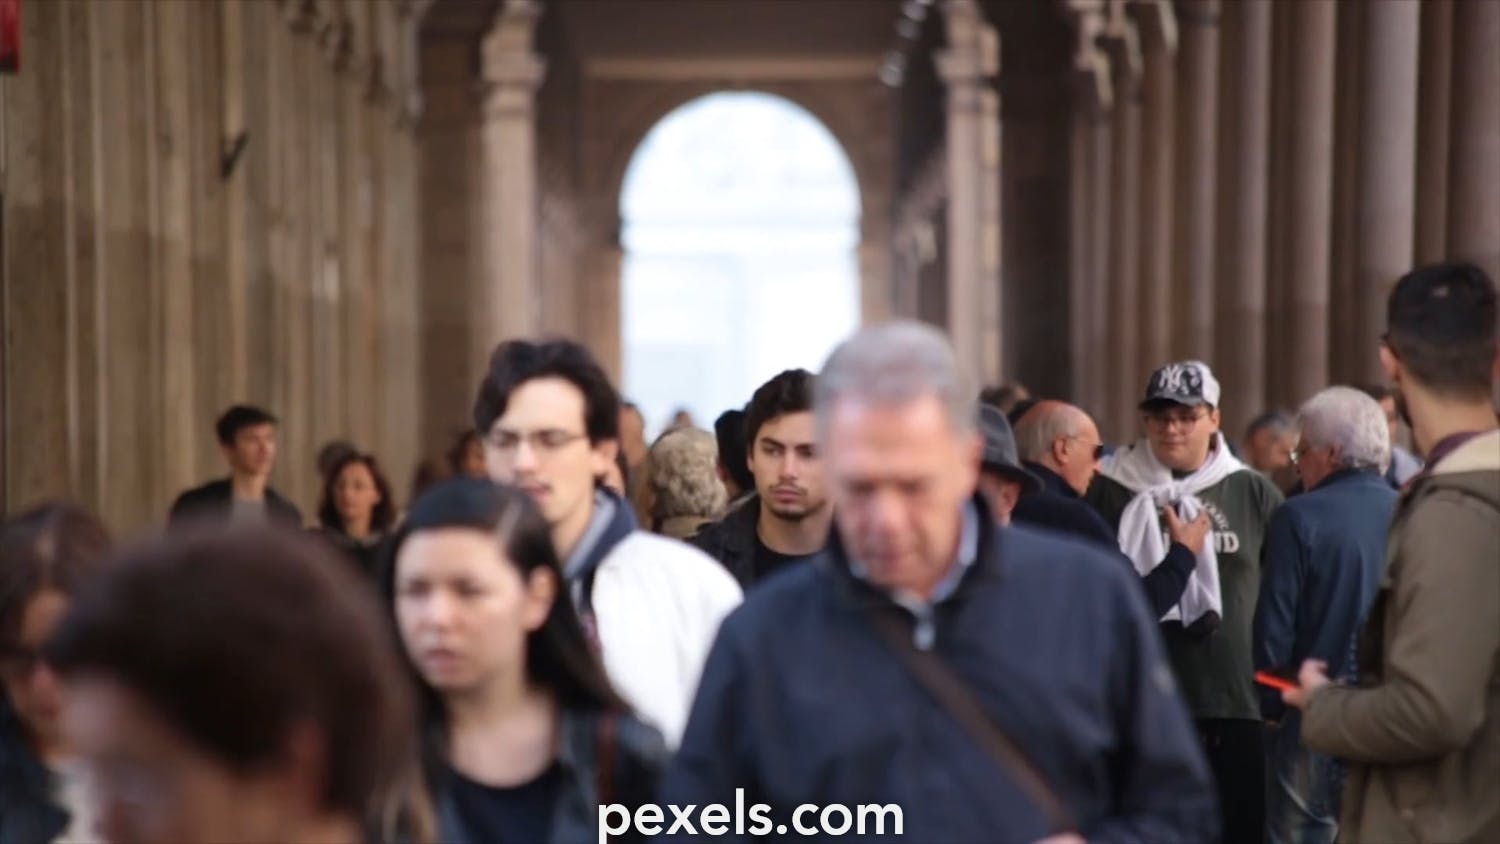 1500px x 1000px - People Videos, Download Free 4k Stock Video Footage & People HD Video Clips